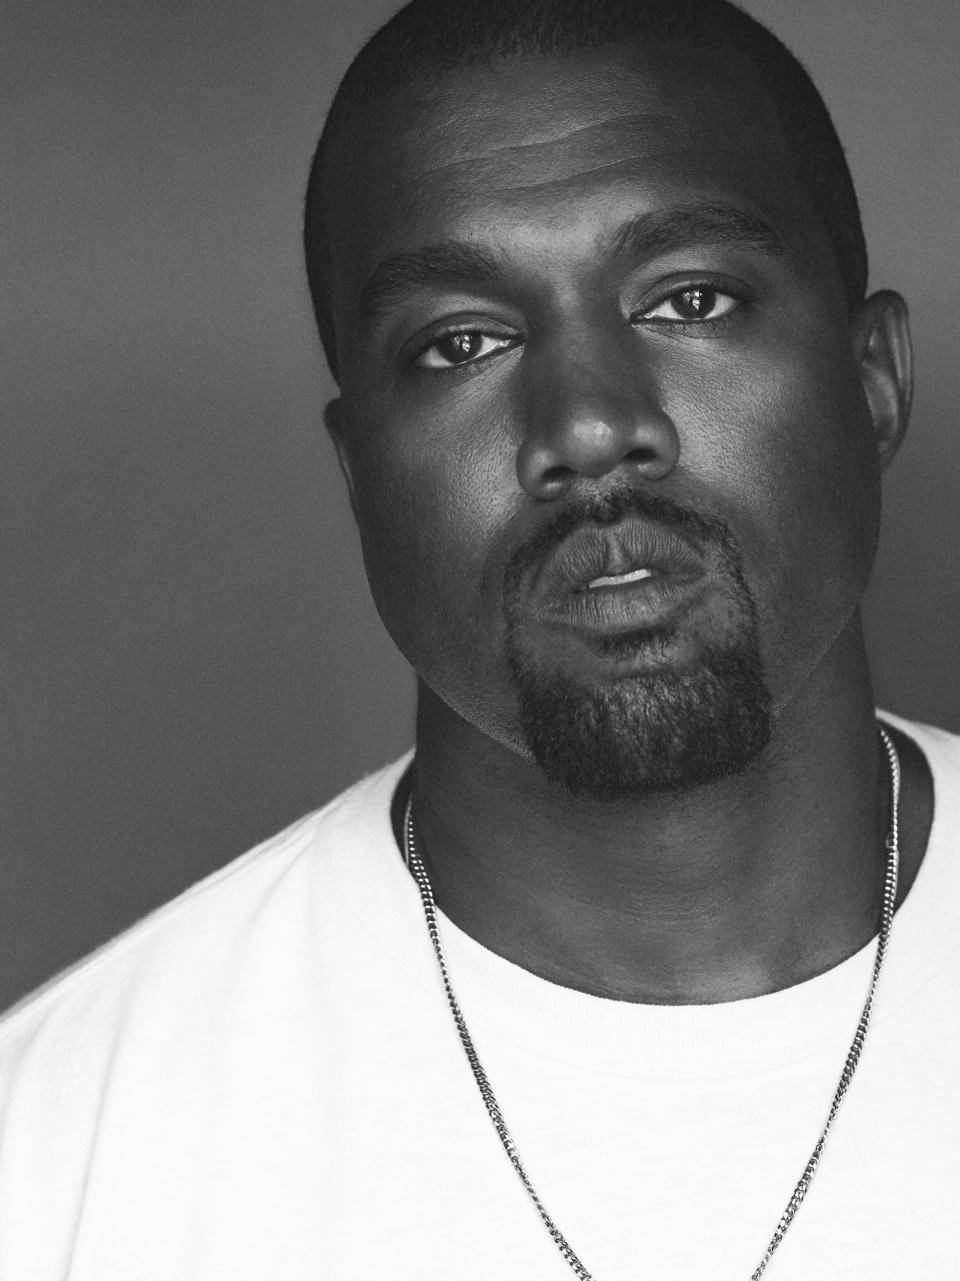 Kanye West is partnering with Gap to expand his Yeezy brand. (Mert Alas and Marcus Piggott)